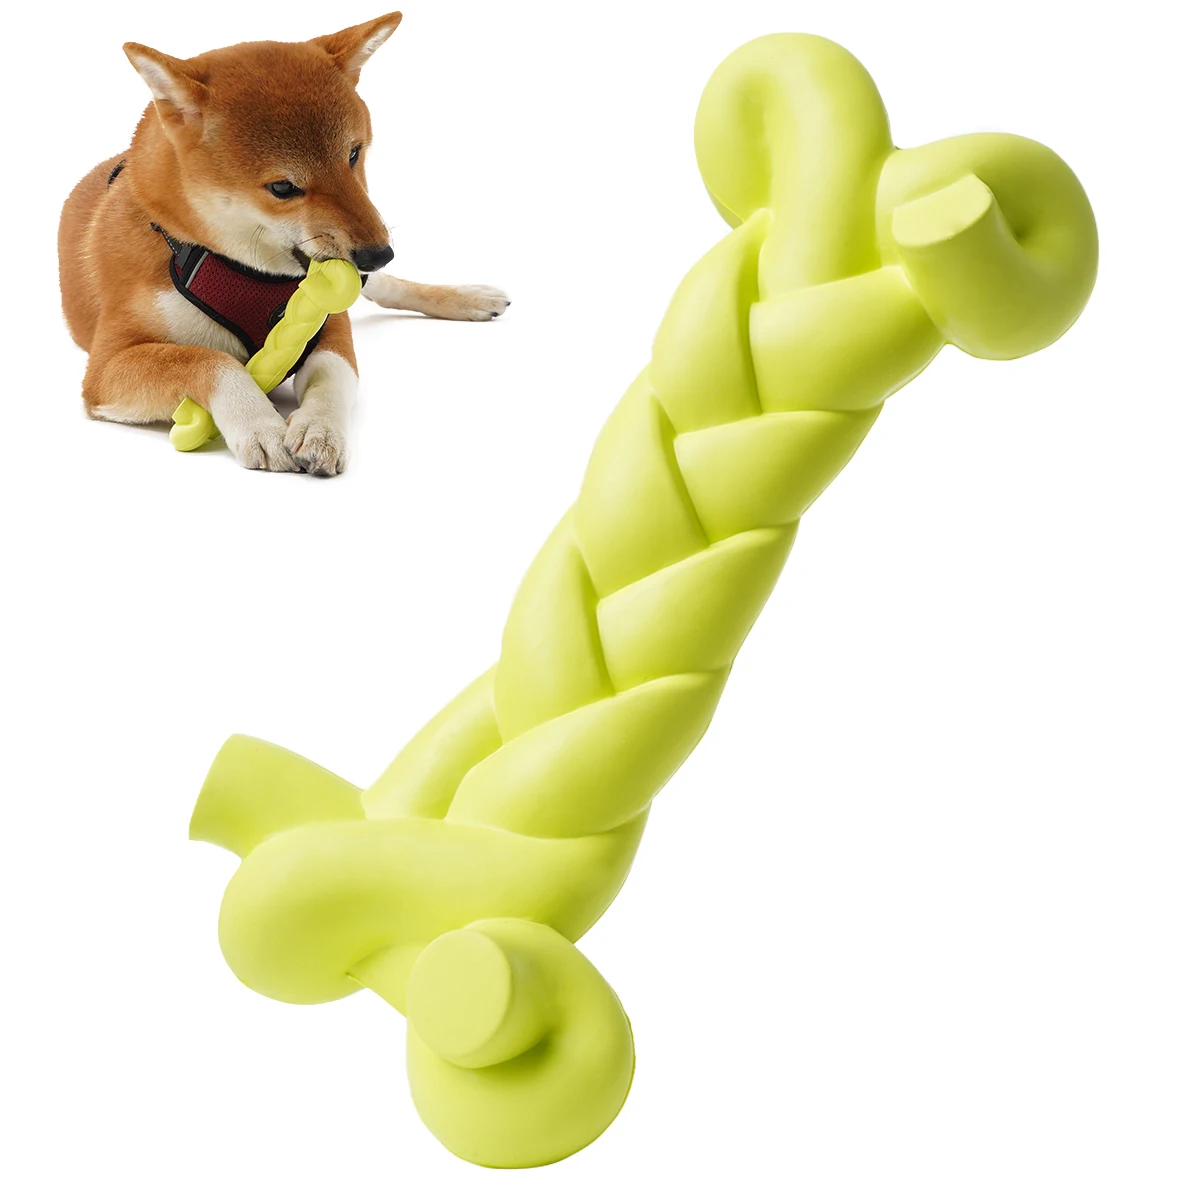 

Multifunction Interactive Teeth-Cleaning Bone Toys Food Dispensing Rubber Chew Dog Toy